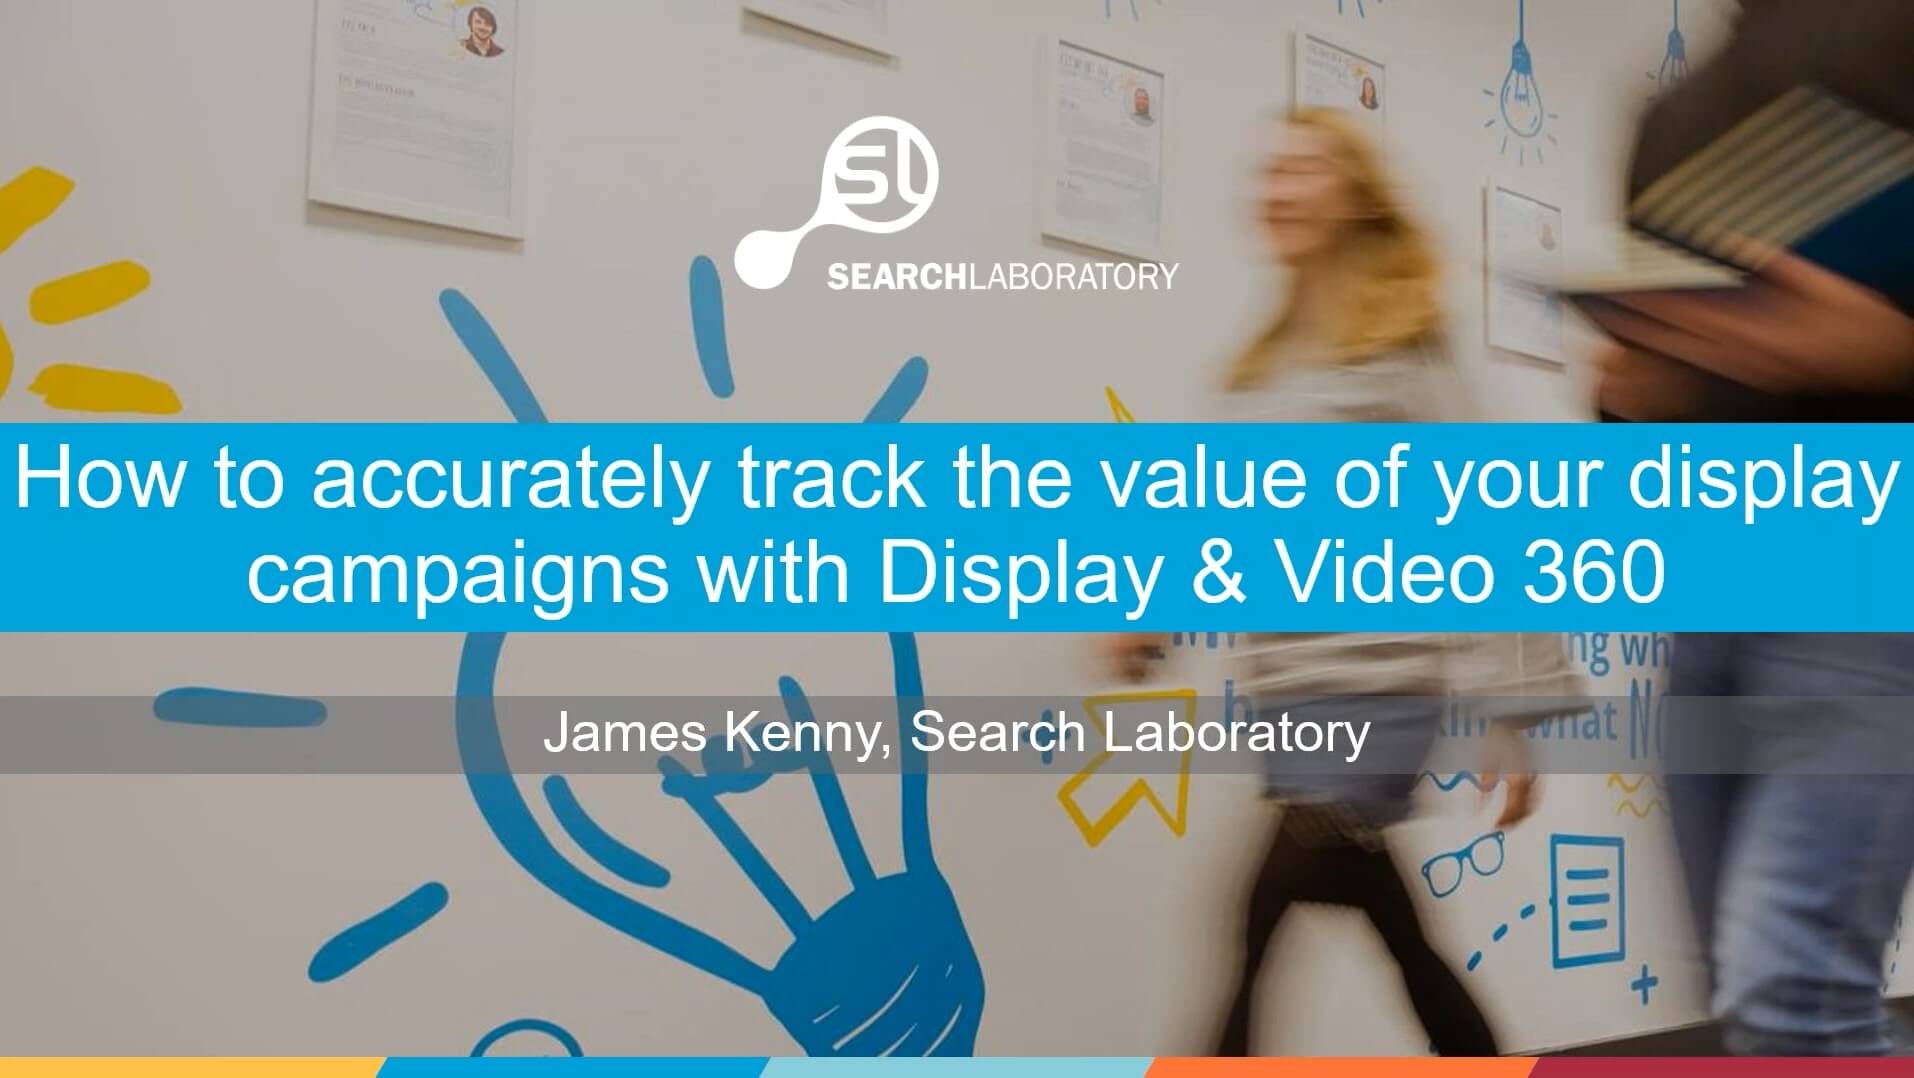 A screenshot of the title card for the webinar hosted by Search Laboratory, digital marketing agency called 'How to accurately track the value of your display campaigns with Display & Video 360'.